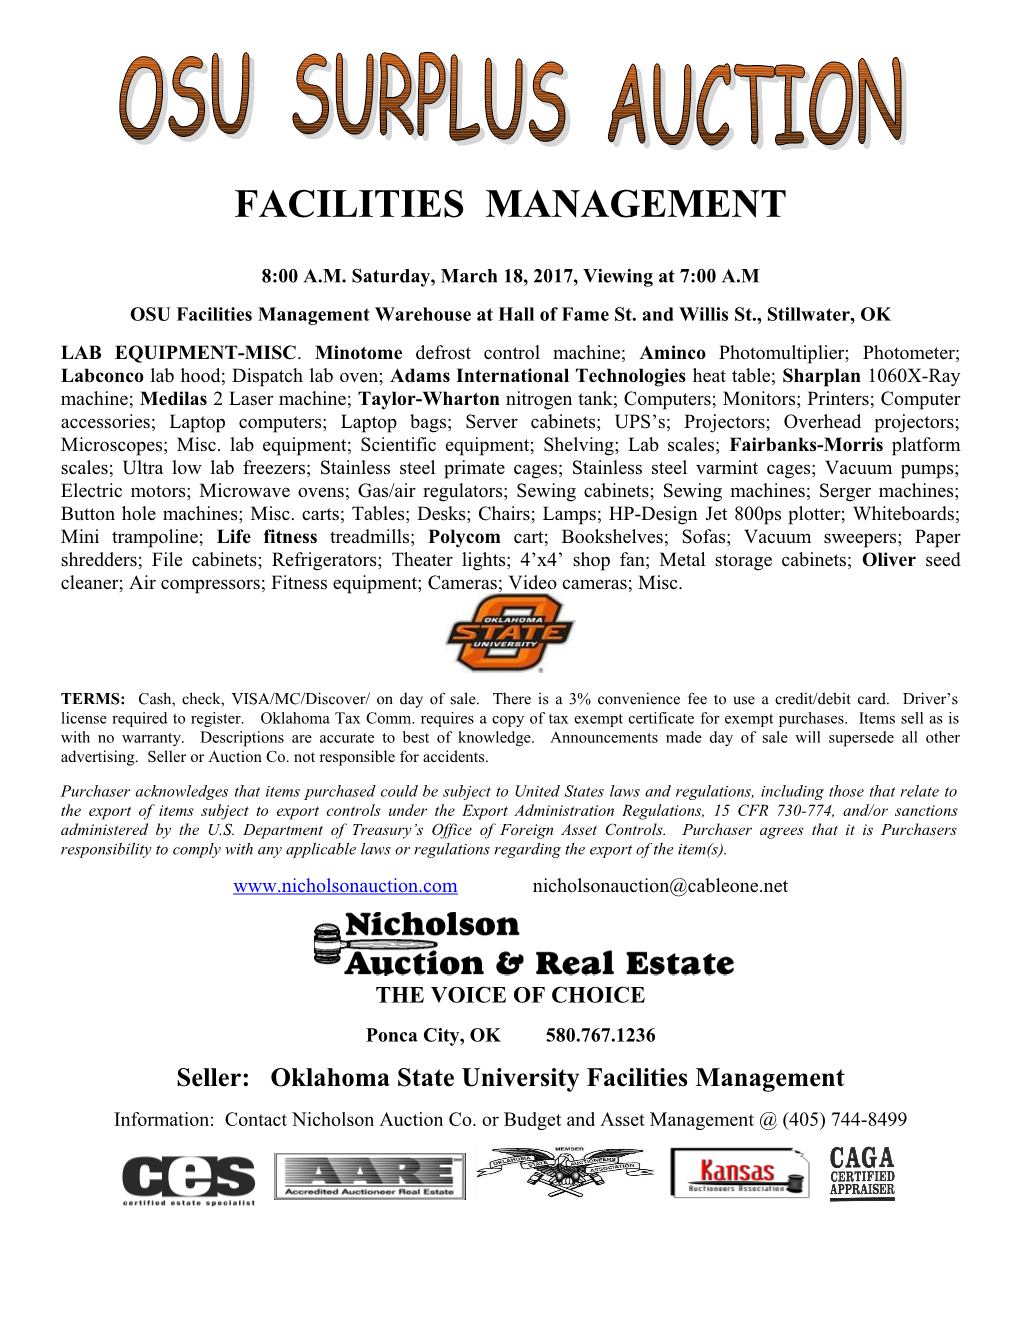 OSU Facilities Management Warehouse at Hall of Fame St. and Willis St., Stillwater, OK